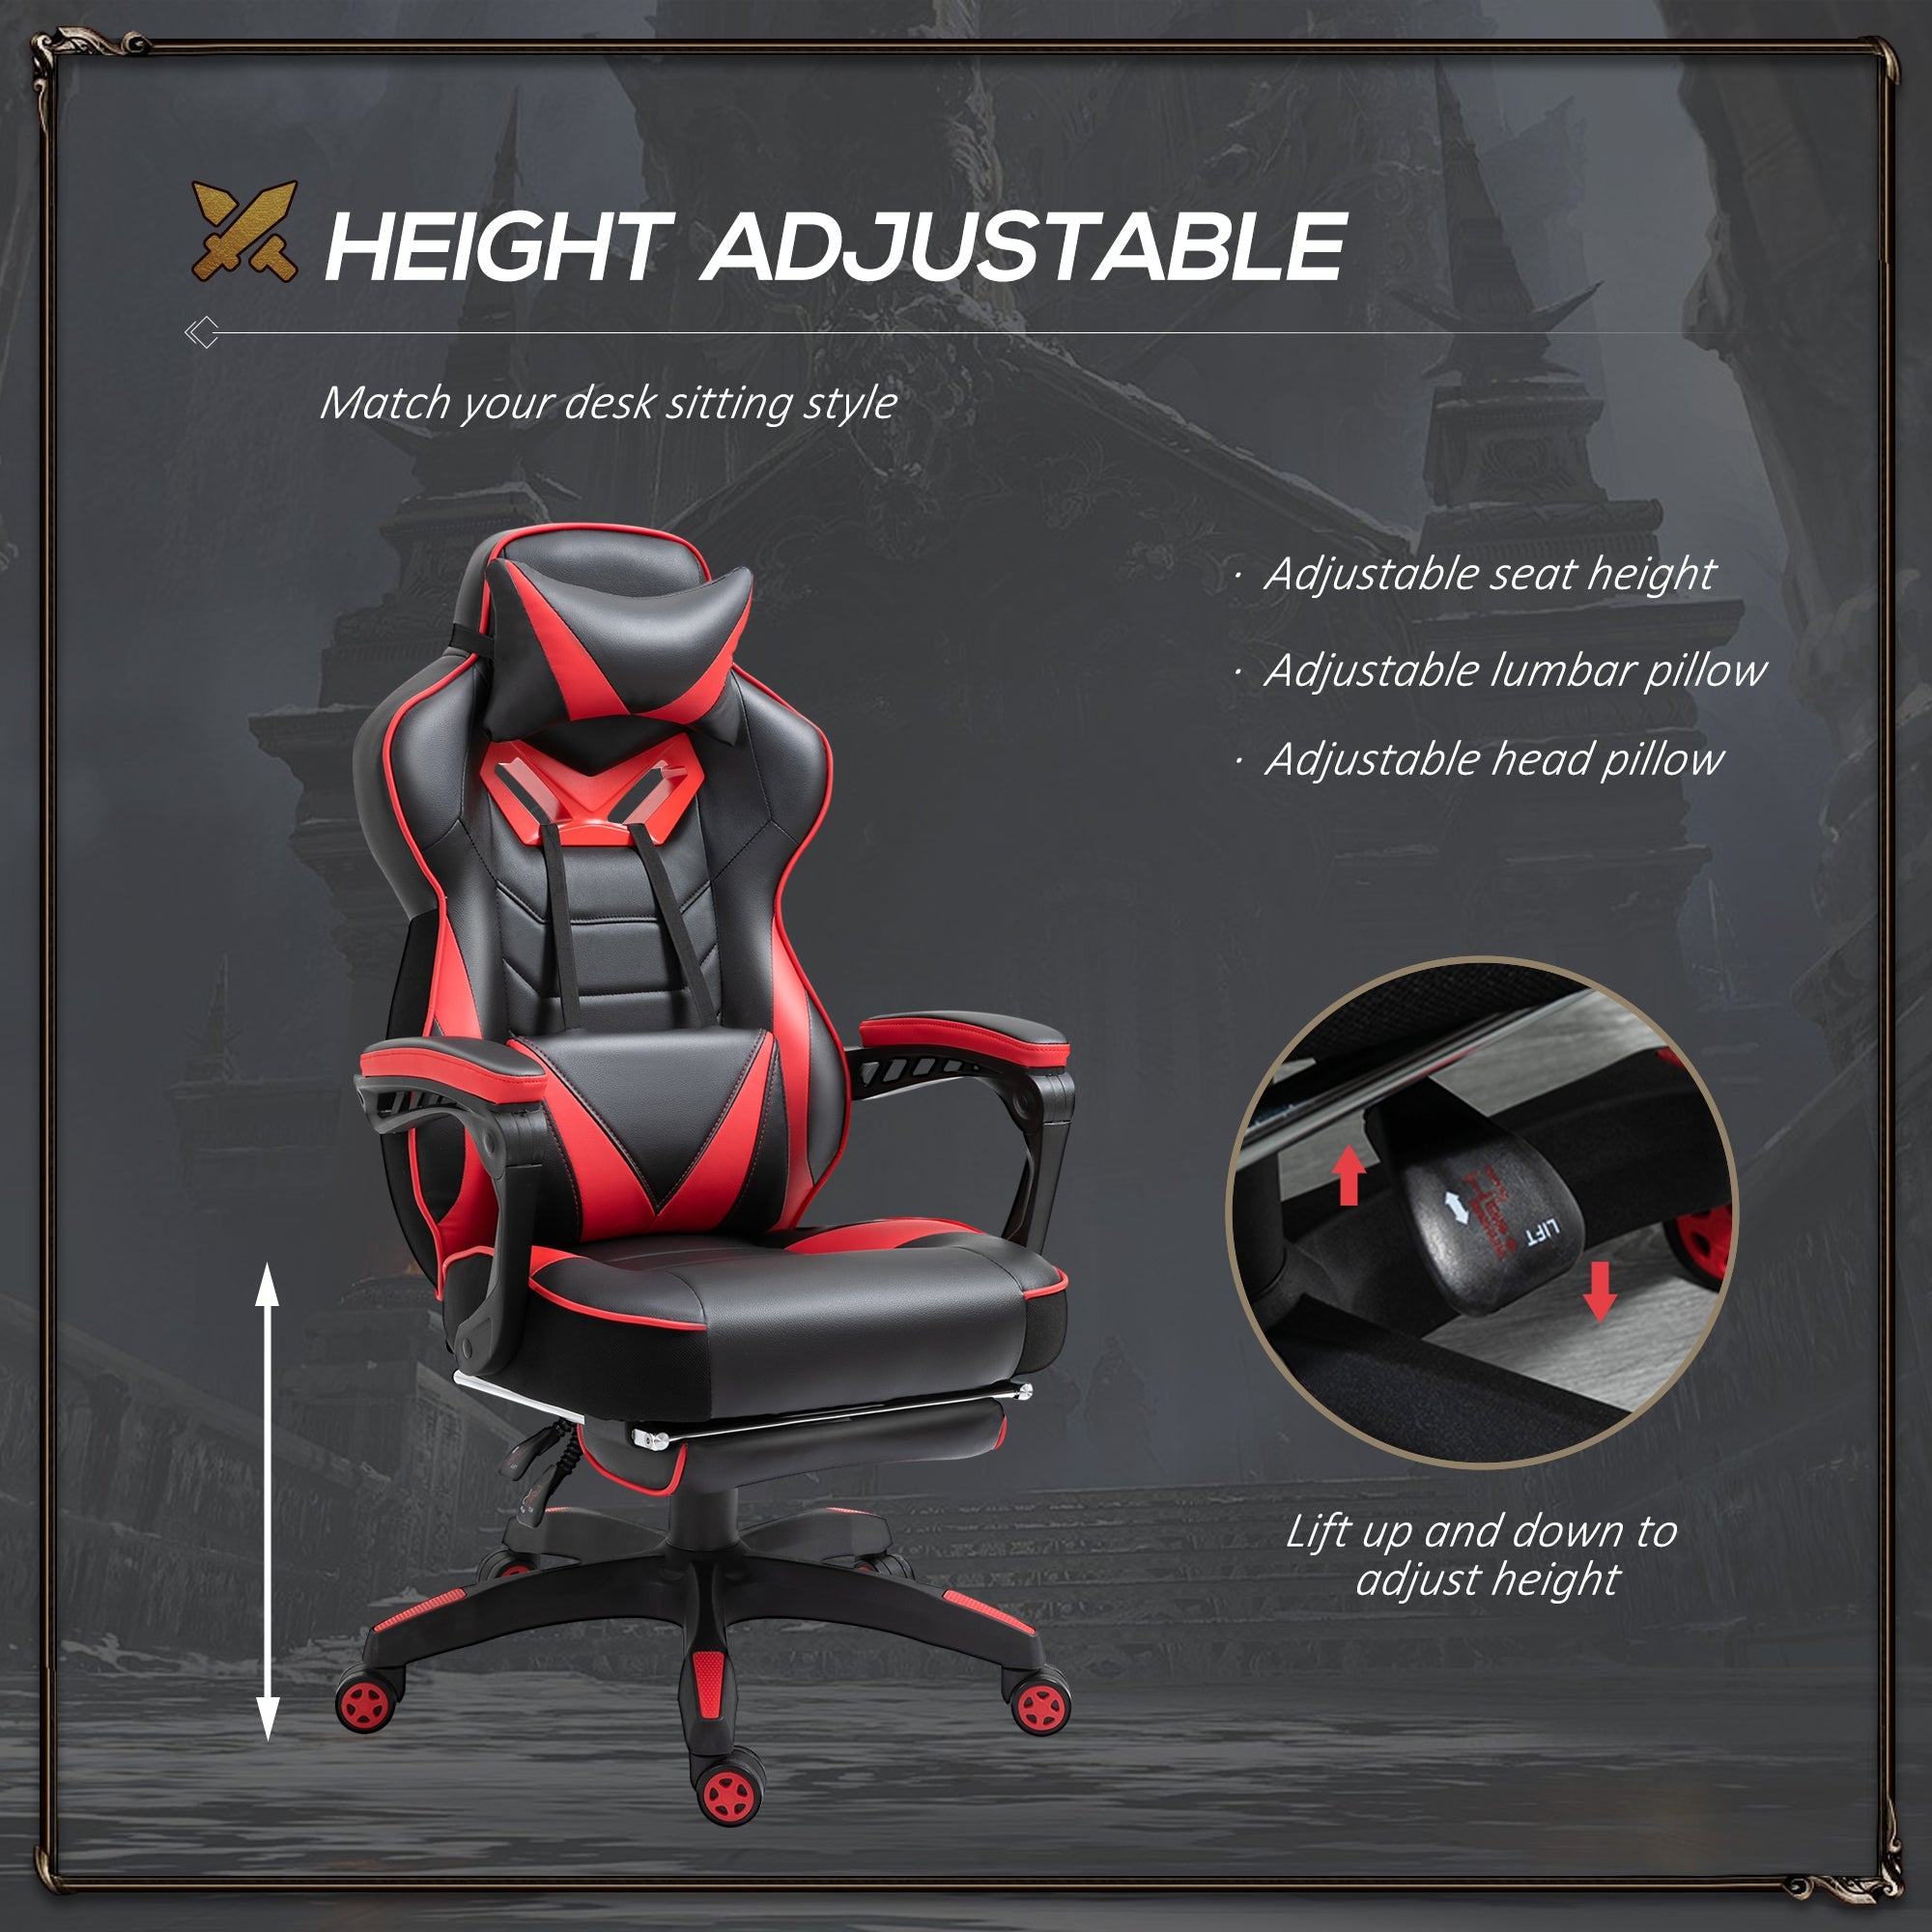 Ergonomic Racing Gaming Chair Office Desk Chair Adjustable Height Recliner with Wheels, Headrest, Lumbar Support, Retractable Footrest, Red-3